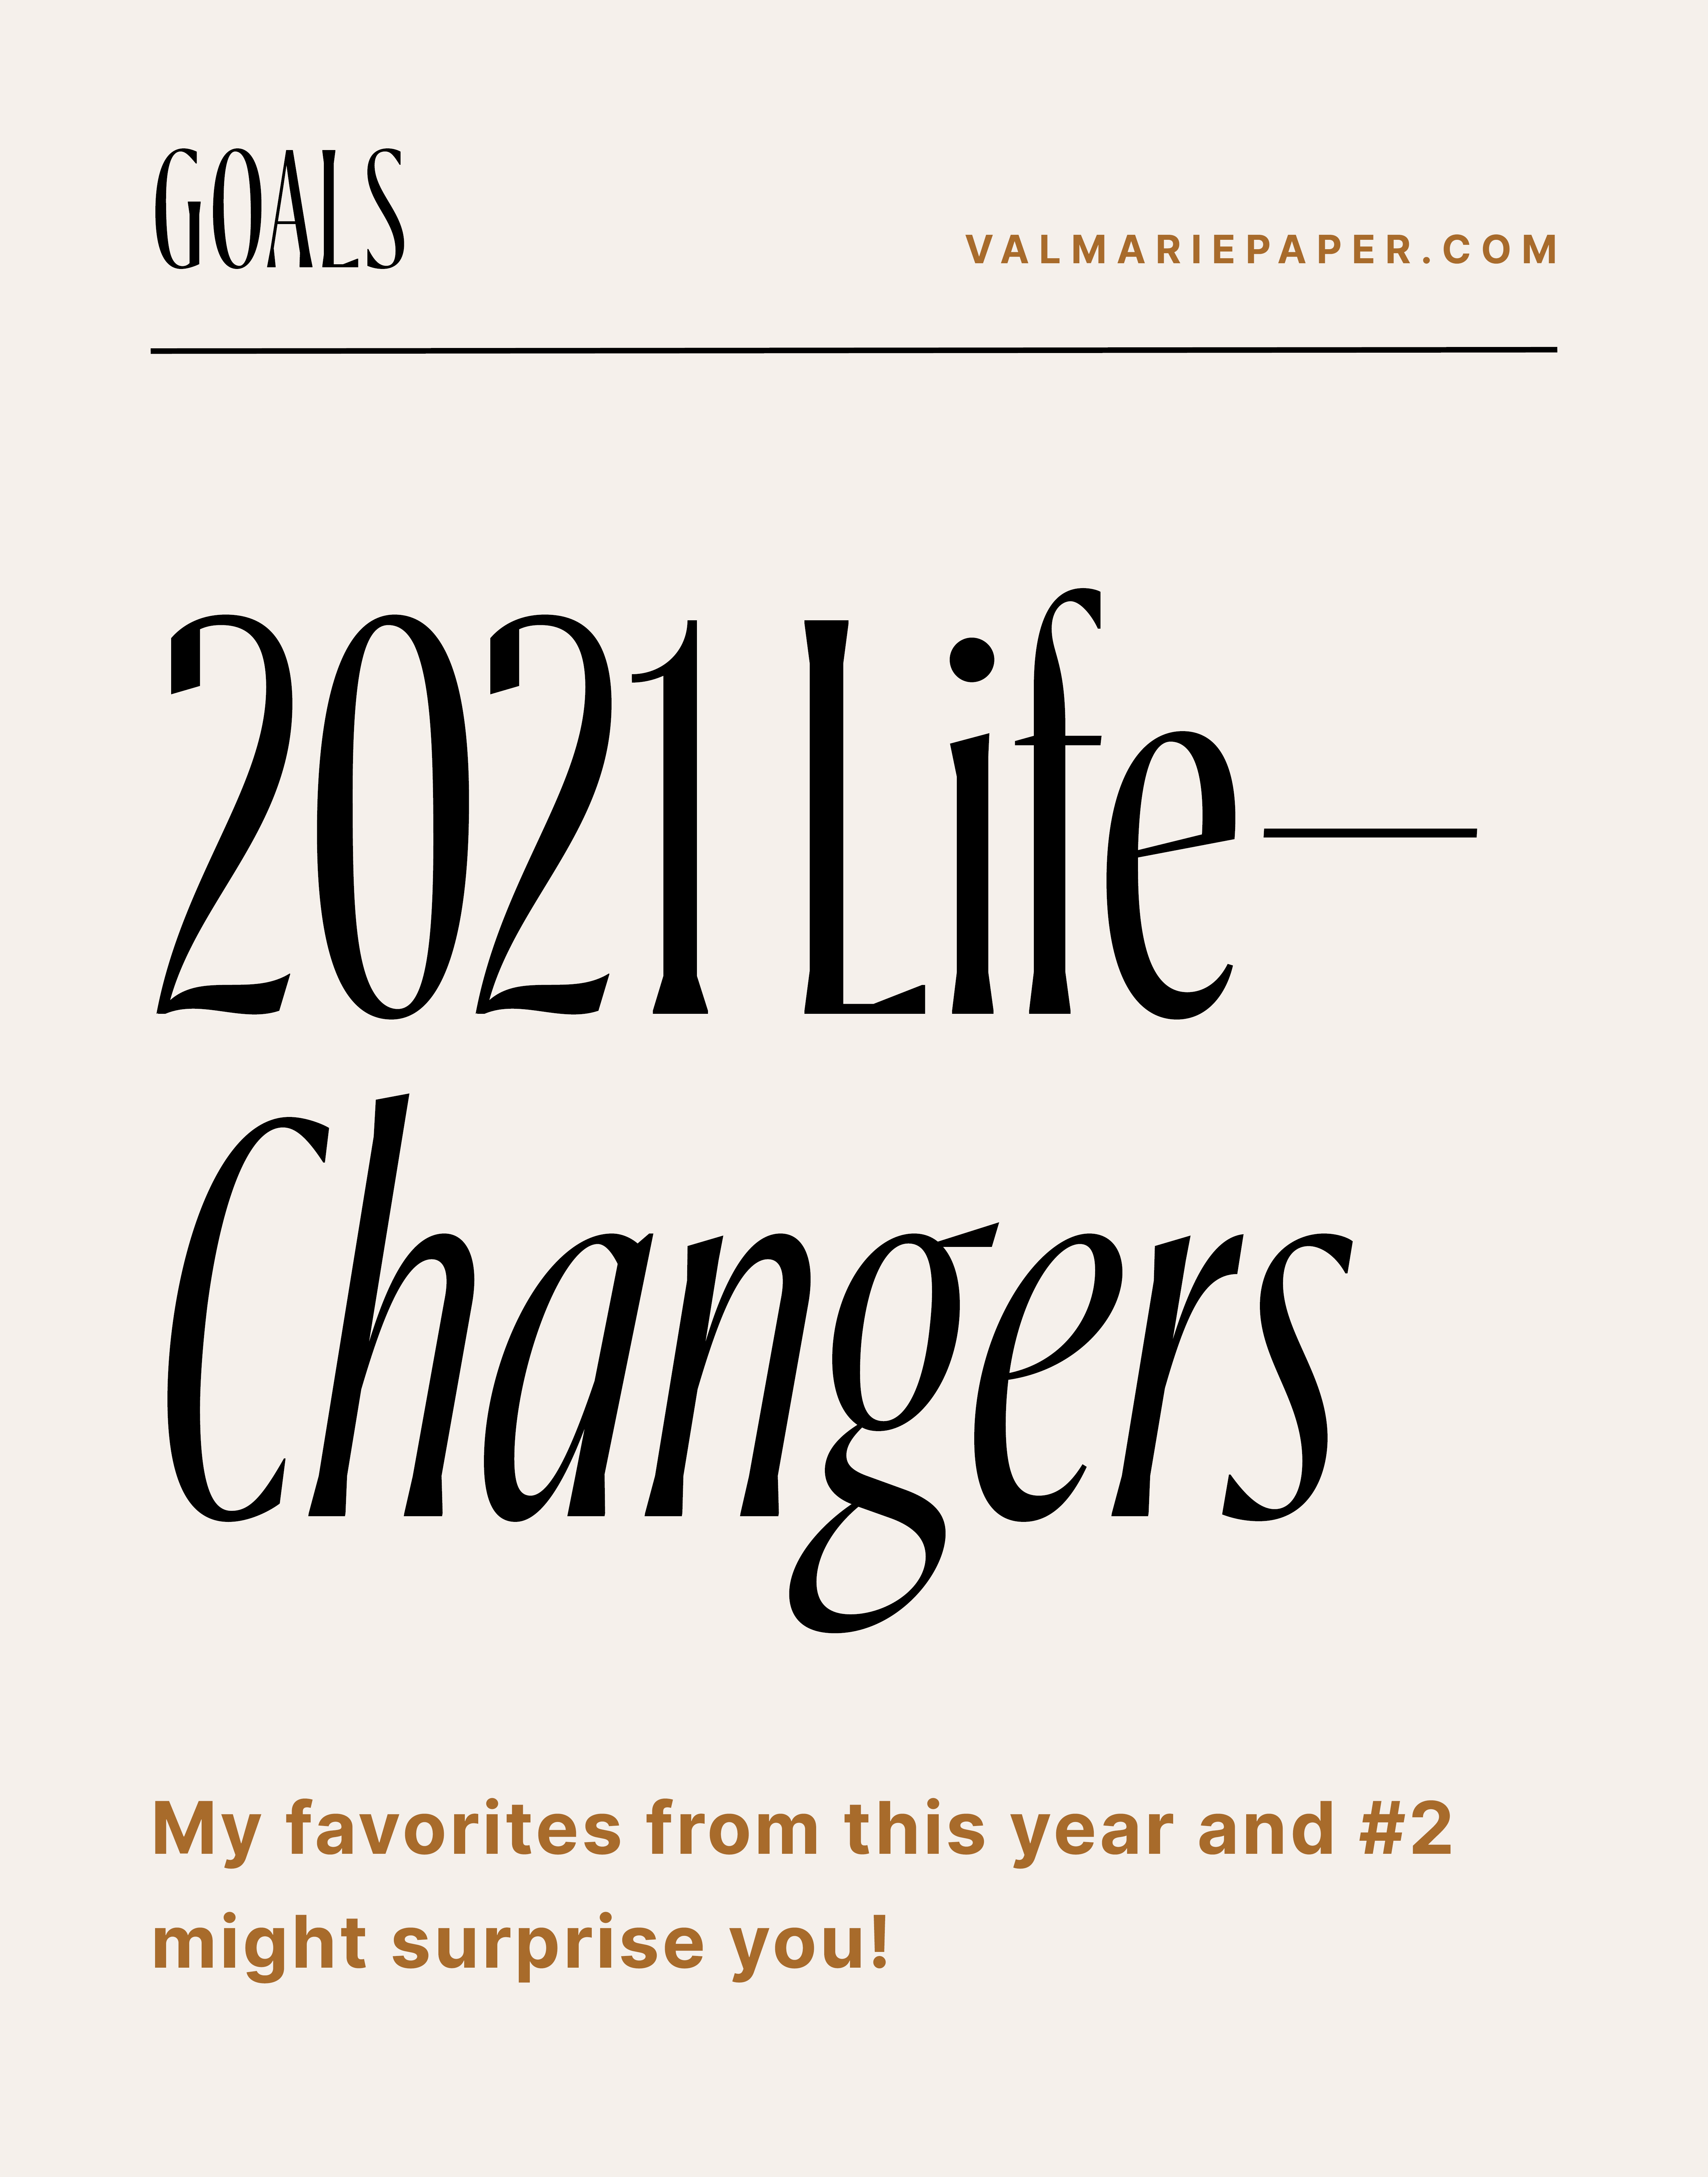 202 Life-Changers by Valerie Woerner, prayer journal, women's ministry, prayer, refresh, meditation, how to make a prayer journal, praying for your kids, husband, prayer warrior, war room, Bible study, tools, prayer notebook, how to pray, community, small group, bible study, 2021 life-changers, goals, annual goals